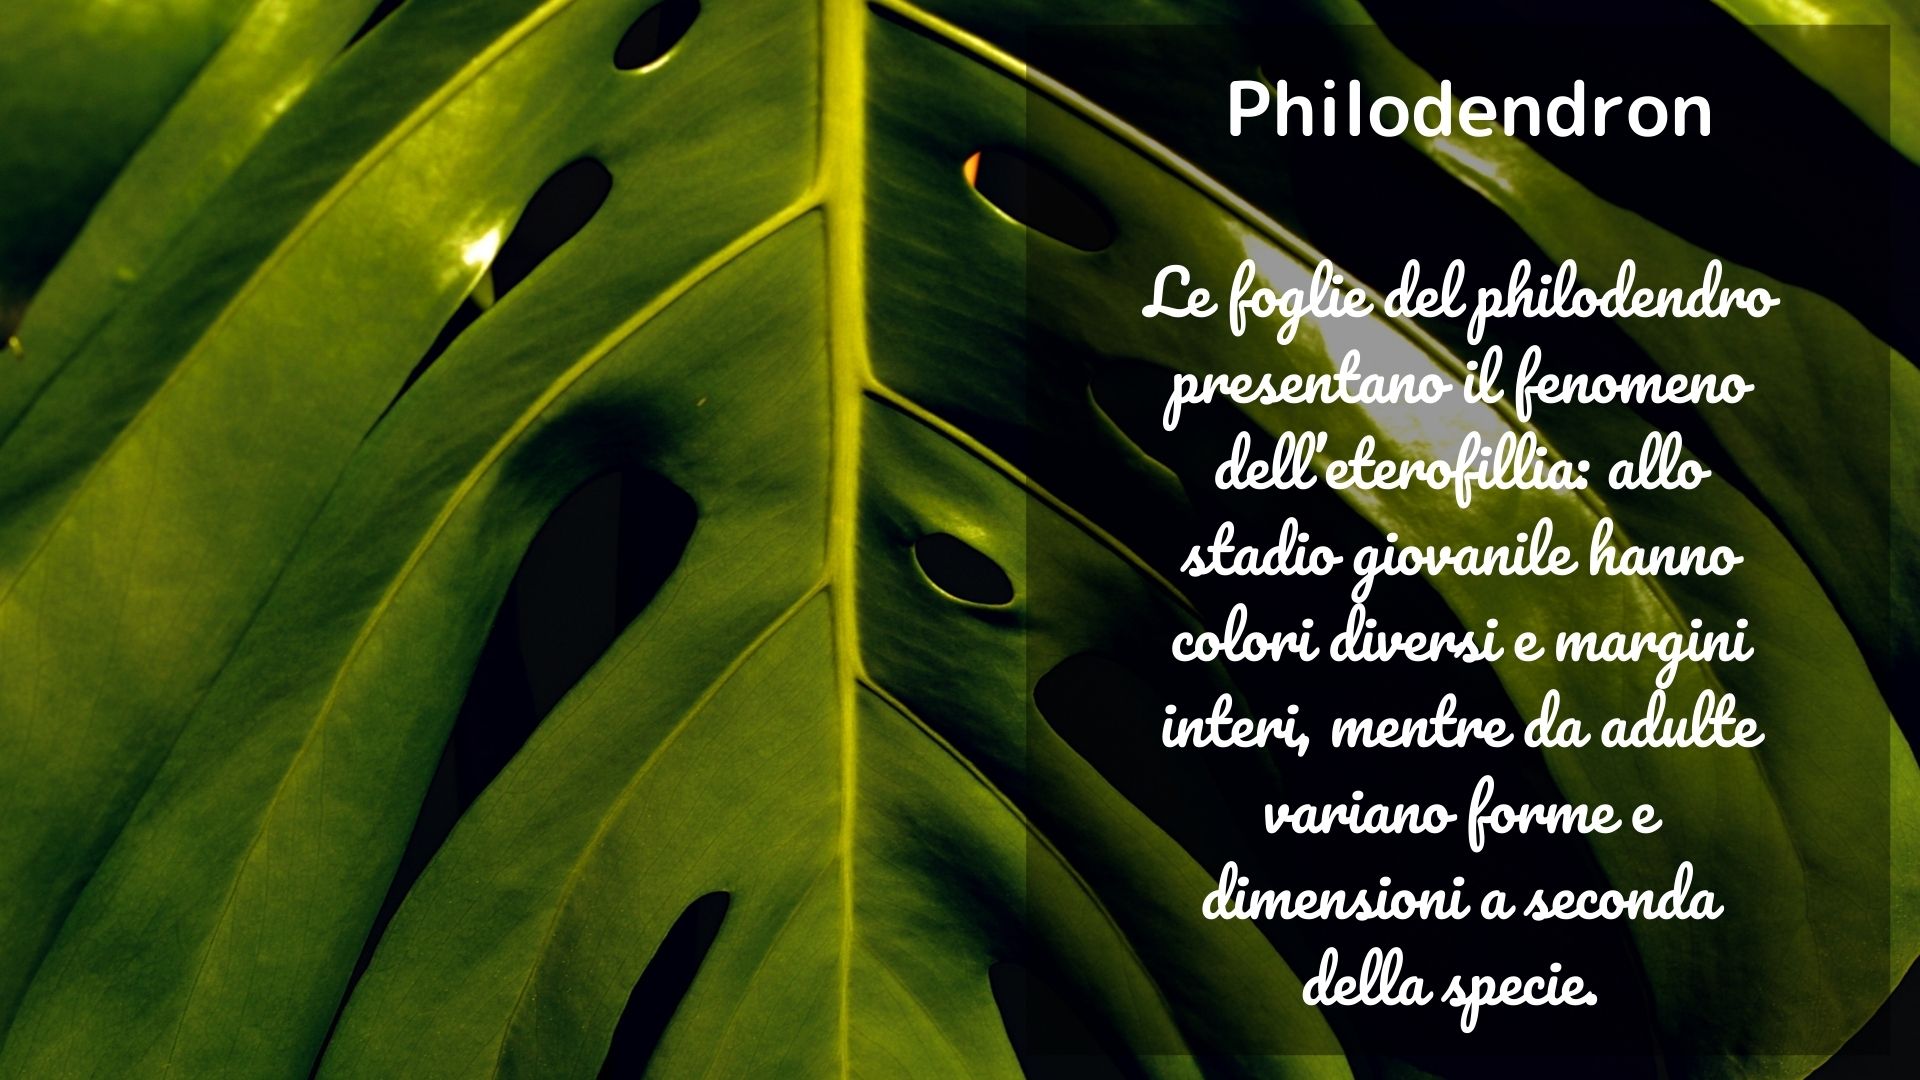 Philodendro